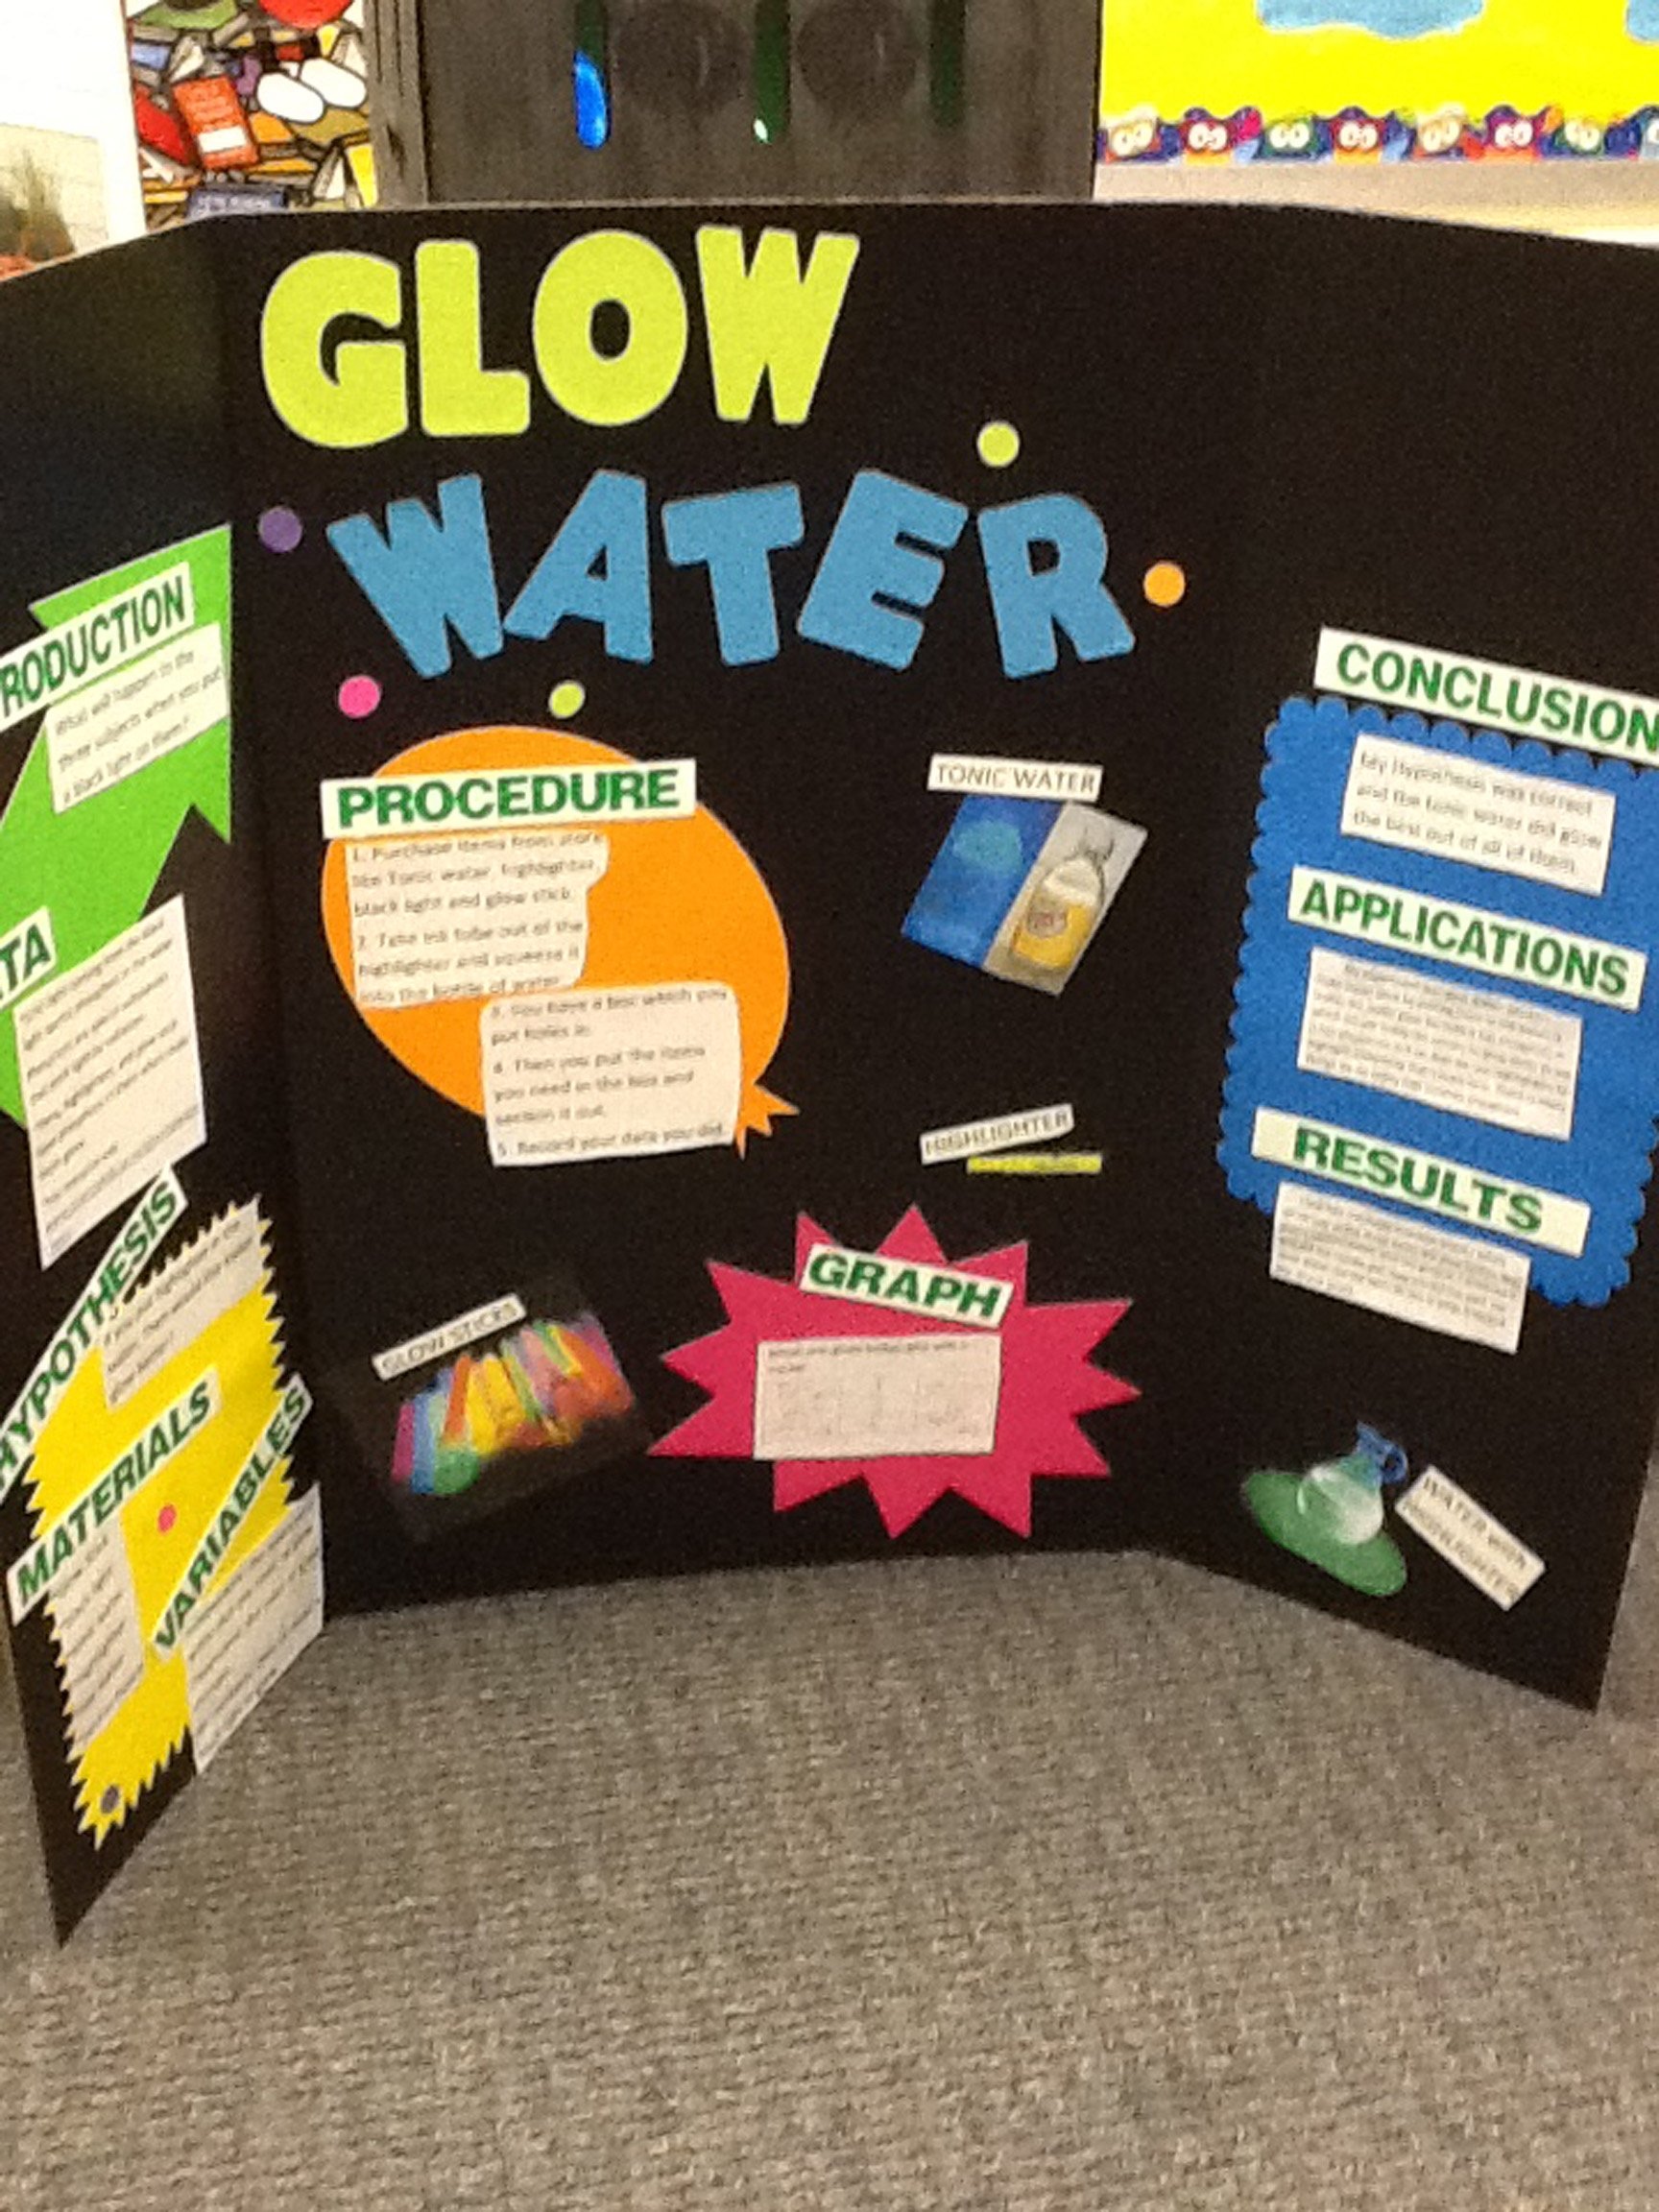 10 Fabulous Science Fair Project Ideas For 6Th Grade sixth grade science fair projects coursework academic service 3 2022